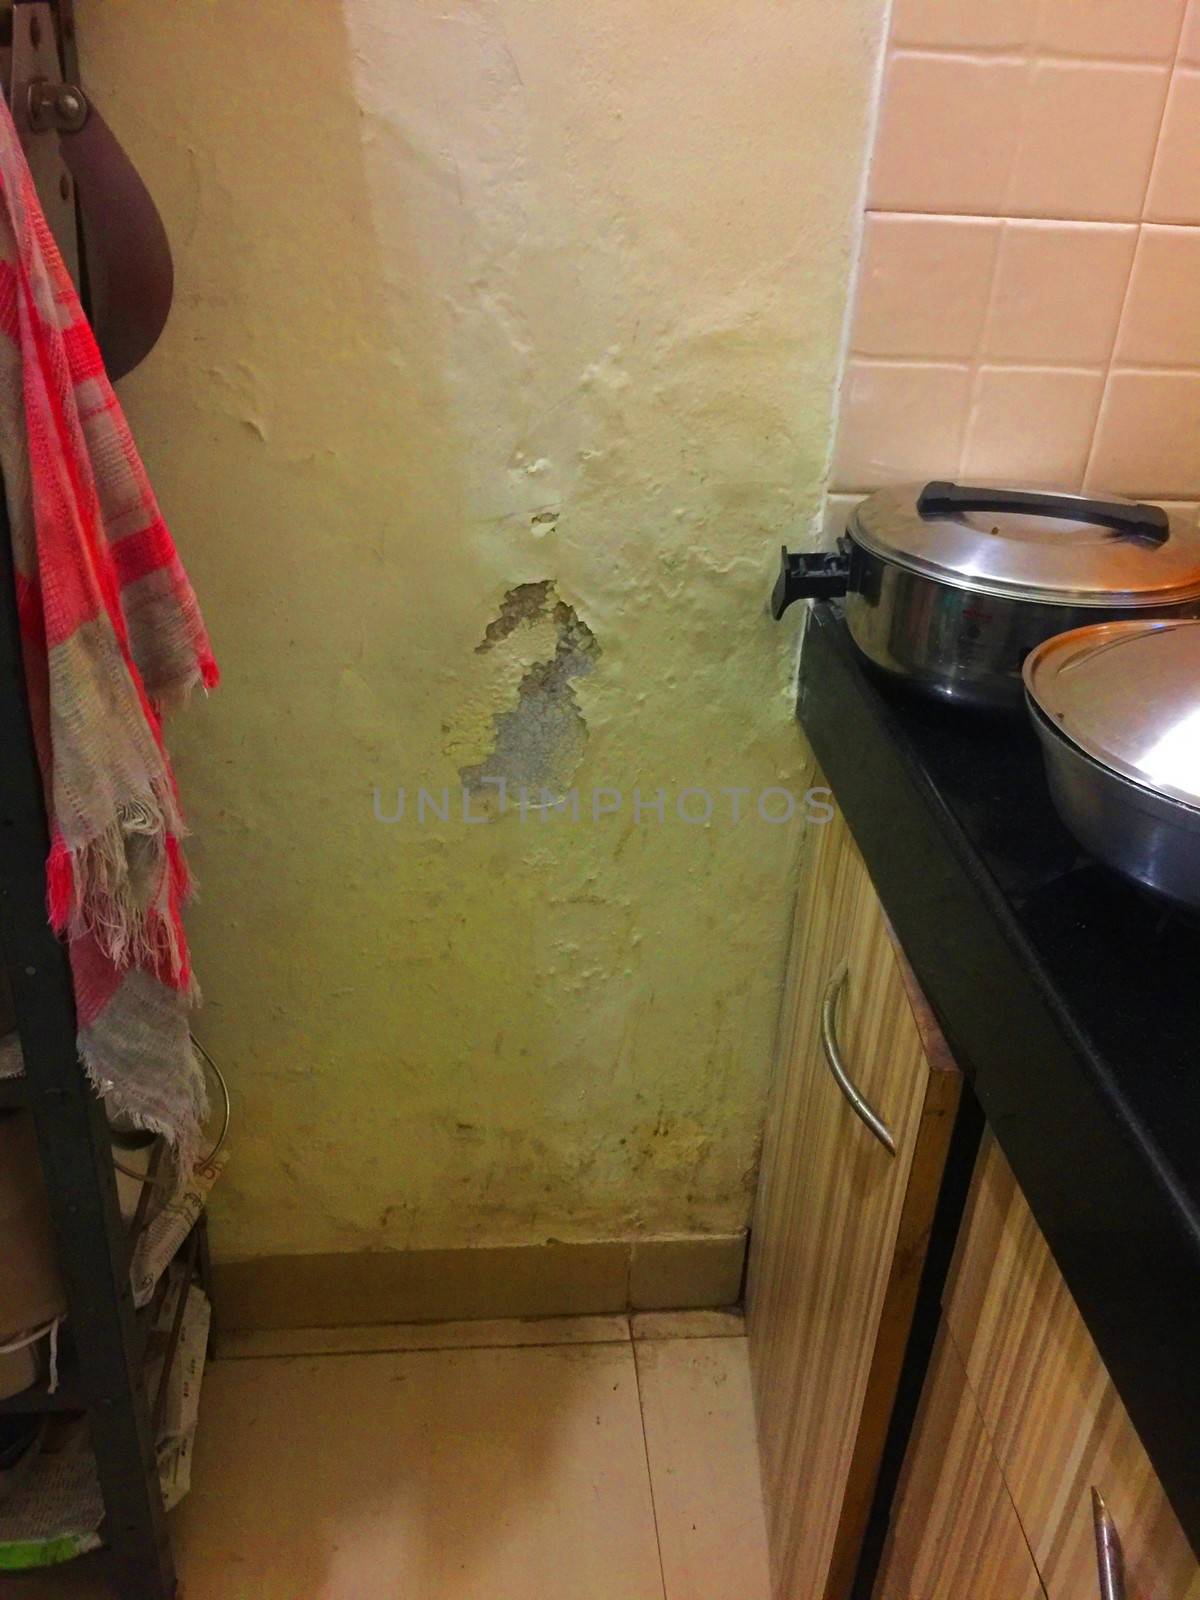 water damage in kitchen by gswagh71